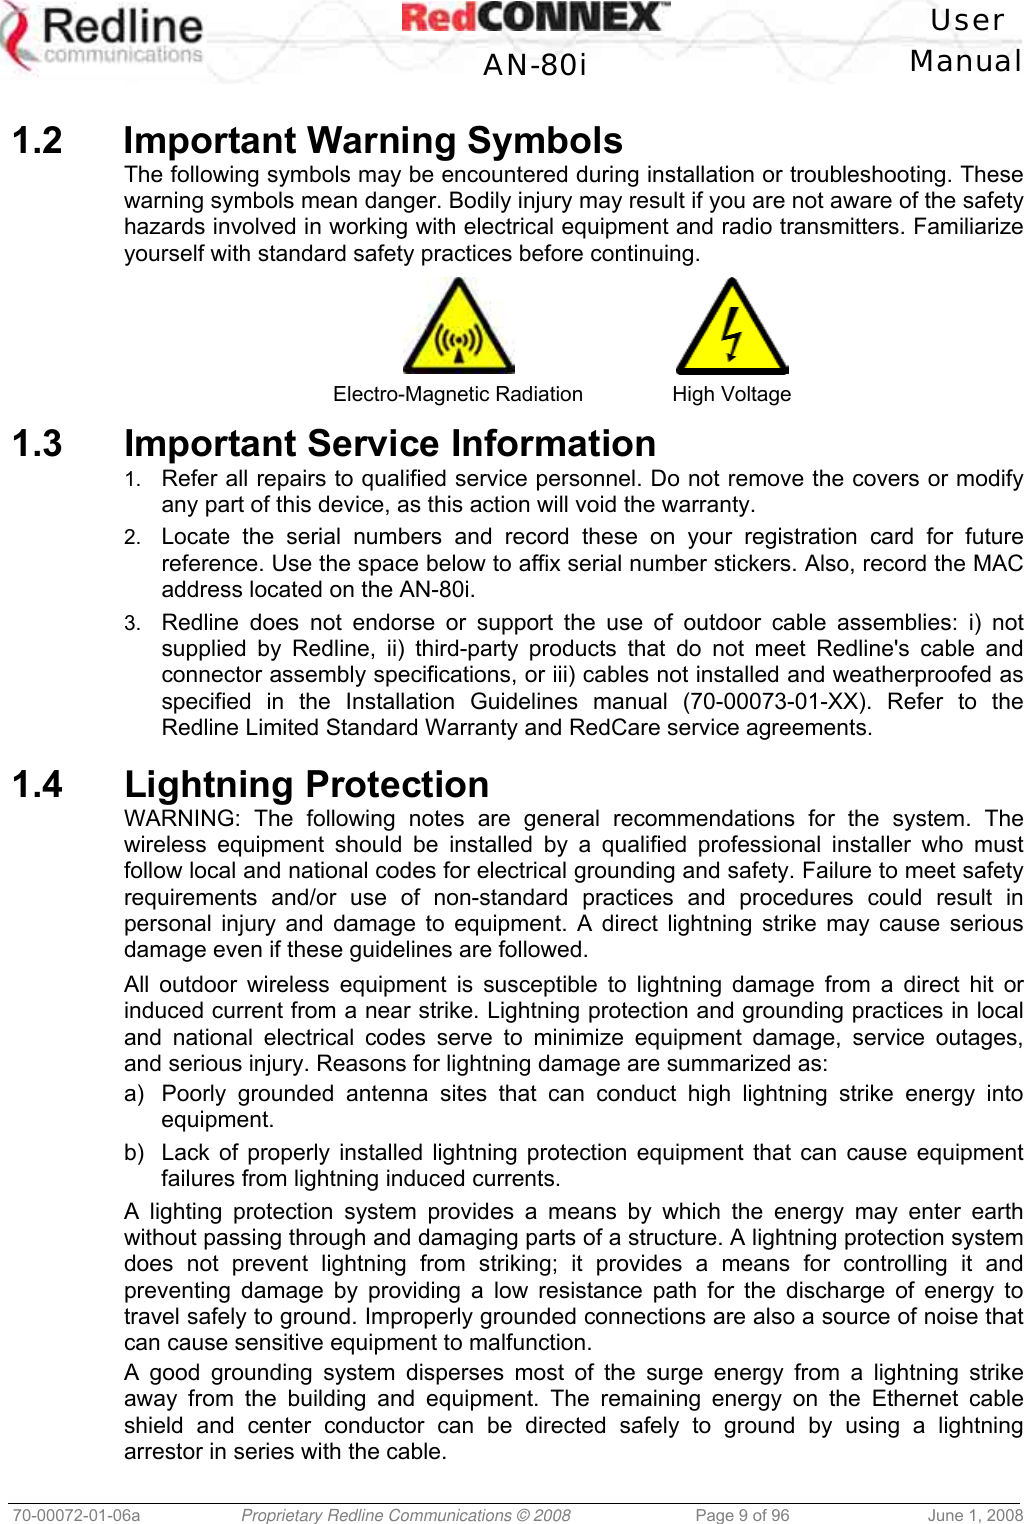   User  AN-80i Manual  70-00072-01-06a  Proprietary Redline Communications © 2008  Page 9 of 96  June 1, 2008  1.2 Important Warning Symbols The following symbols may be encountered during installation or troubleshooting. These warning symbols mean danger. Bodily injury may result if you are not aware of the safety hazards involved in working with electrical equipment and radio transmitters. Familiarize yourself with standard safety practices before continuing.   Electro-Magnetic Radiation  High Voltage 1.3  Important Service Information 1.  Refer all repairs to qualified service personnel. Do not remove the covers or modify any part of this device, as this action will void the warranty. 2.  Locate the serial numbers and record these on your registration card for future reference. Use the space below to affix serial number stickers. Also, record the MAC address located on the AN-80i. 3.  Redline does not endorse or support the use of outdoor cable assemblies: i) not supplied by Redline, ii) third-party products that do not meet Redline&apos;s cable and connector assembly specifications, or iii) cables not installed and weatherproofed as specified in the Installation Guidelines manual (70-00073-01-XX). Refer to the Redline Limited Standard Warranty and RedCare service agreements.  1.4 Lightning Protection WARNING: The following notes are general recommendations for the system. The wireless equipment should be installed by a qualified professional installer who must follow local and national codes for electrical grounding and safety. Failure to meet safety requirements and/or use of non-standard practices and procedures could result in personal injury and damage to equipment. A direct lightning strike may cause serious damage even if these guidelines are followed. All outdoor wireless equipment is susceptible to lightning damage from a direct hit or induced current from a near strike. Lightning protection and grounding practices in local and national electrical codes serve to minimize equipment damage, service outages, and serious injury. Reasons for lightning damage are summarized as: a)  Poorly grounded antenna sites that can conduct high lightning strike energy into equipment. b)  Lack of properly installed lightning protection equipment that can cause equipment failures from lightning induced currents. A lighting protection system provides a means by which the energy may enter earth without passing through and damaging parts of a structure. A lightning protection system does not prevent lightning from striking; it provides a means for controlling it and preventing damage by providing a low resistance path for the discharge of energy to travel safely to ground. Improperly grounded connections are also a source of noise that can cause sensitive equipment to malfunction. A good grounding system disperses most of the surge energy from a lightning strike away from the building and equipment. The remaining energy on the Ethernet cable shield and center conductor can be directed safely to ground by using a lightning arrestor in series with the cable. 